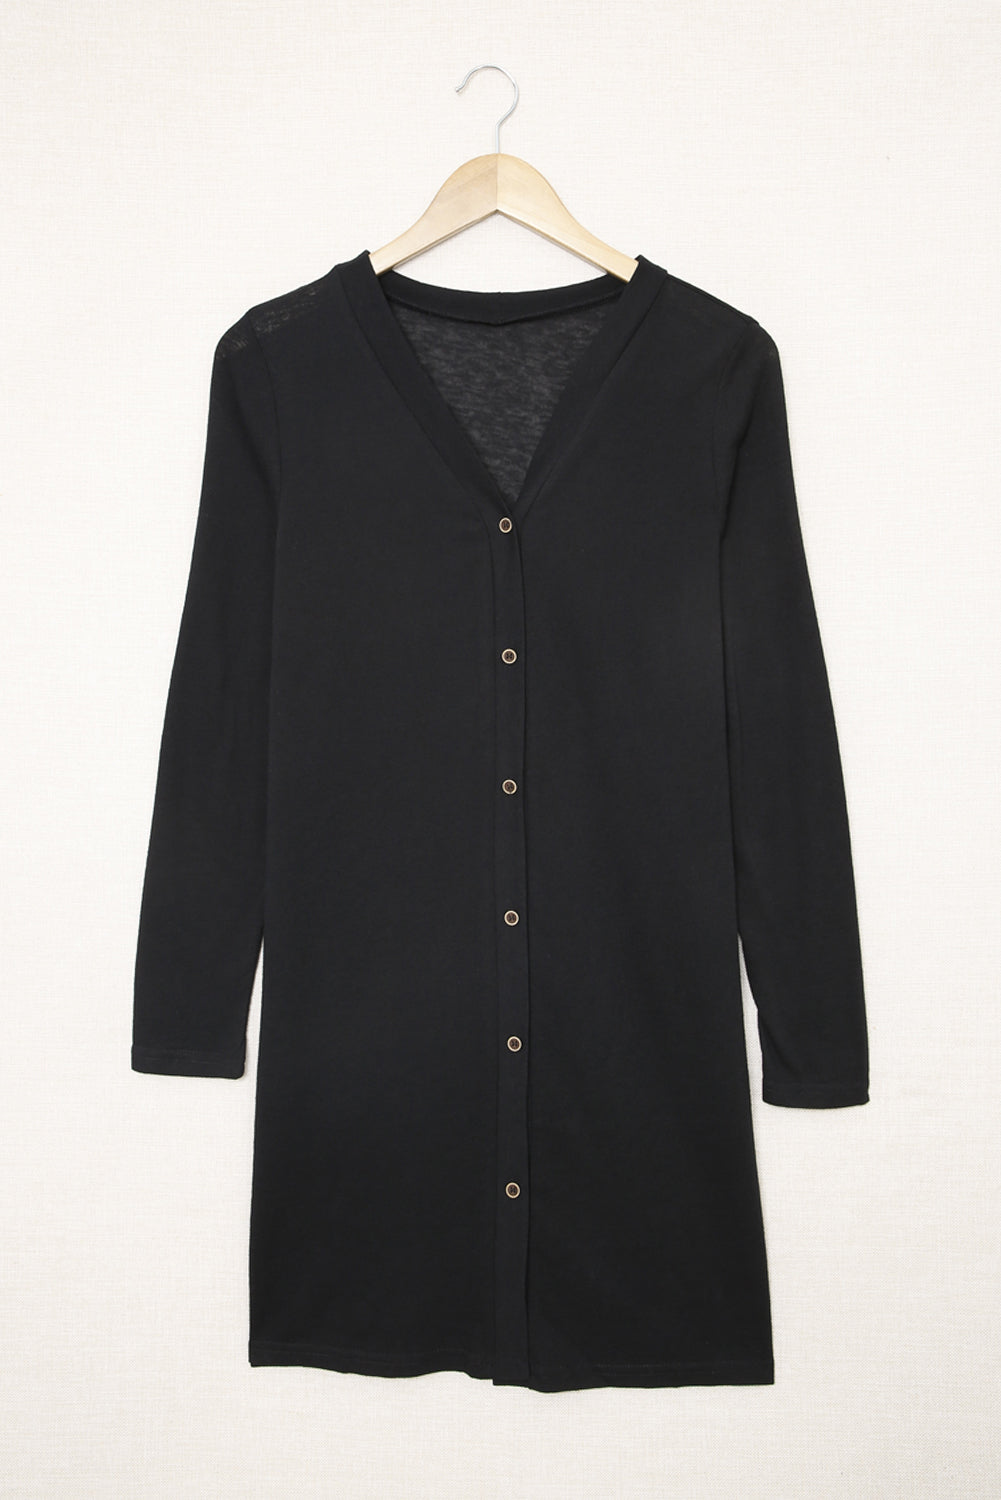 Cali Chic Black Solid Color Open Front Buttons Cardigan